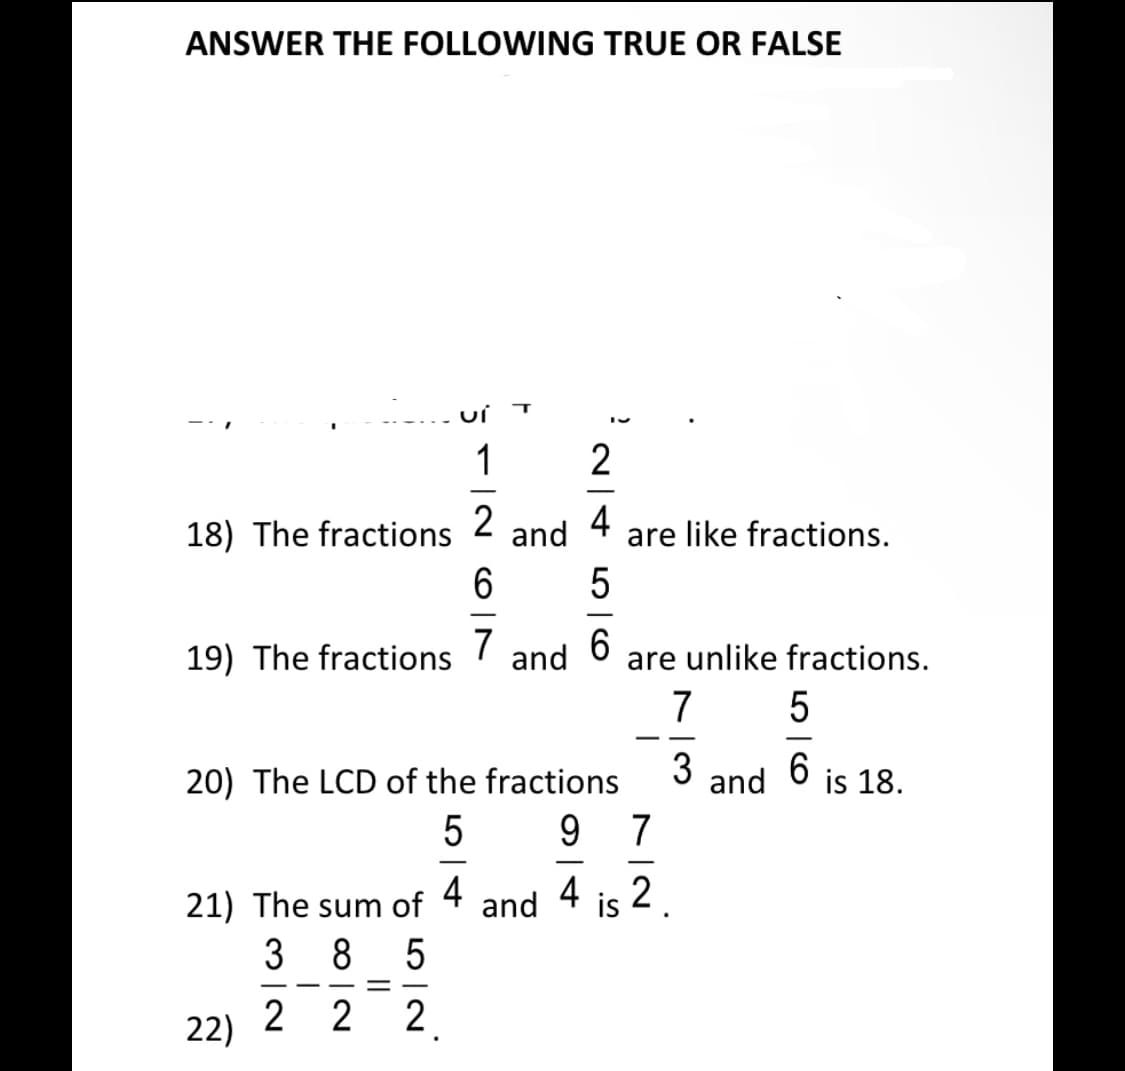 ANSWER THE FOLLOWING TRUE OR FALSE
1
2
-
2
18) The fractions
and
4
are like fractions.
-
19) The fractions
7
and
are unlike fractions.
7
- -
3
20) The LCD of the fractions
and
6.
is 18.
9.
7
-
21) The sum of
4
and
4
is
s 2
3 8 5
-
22)
2 2 2.
